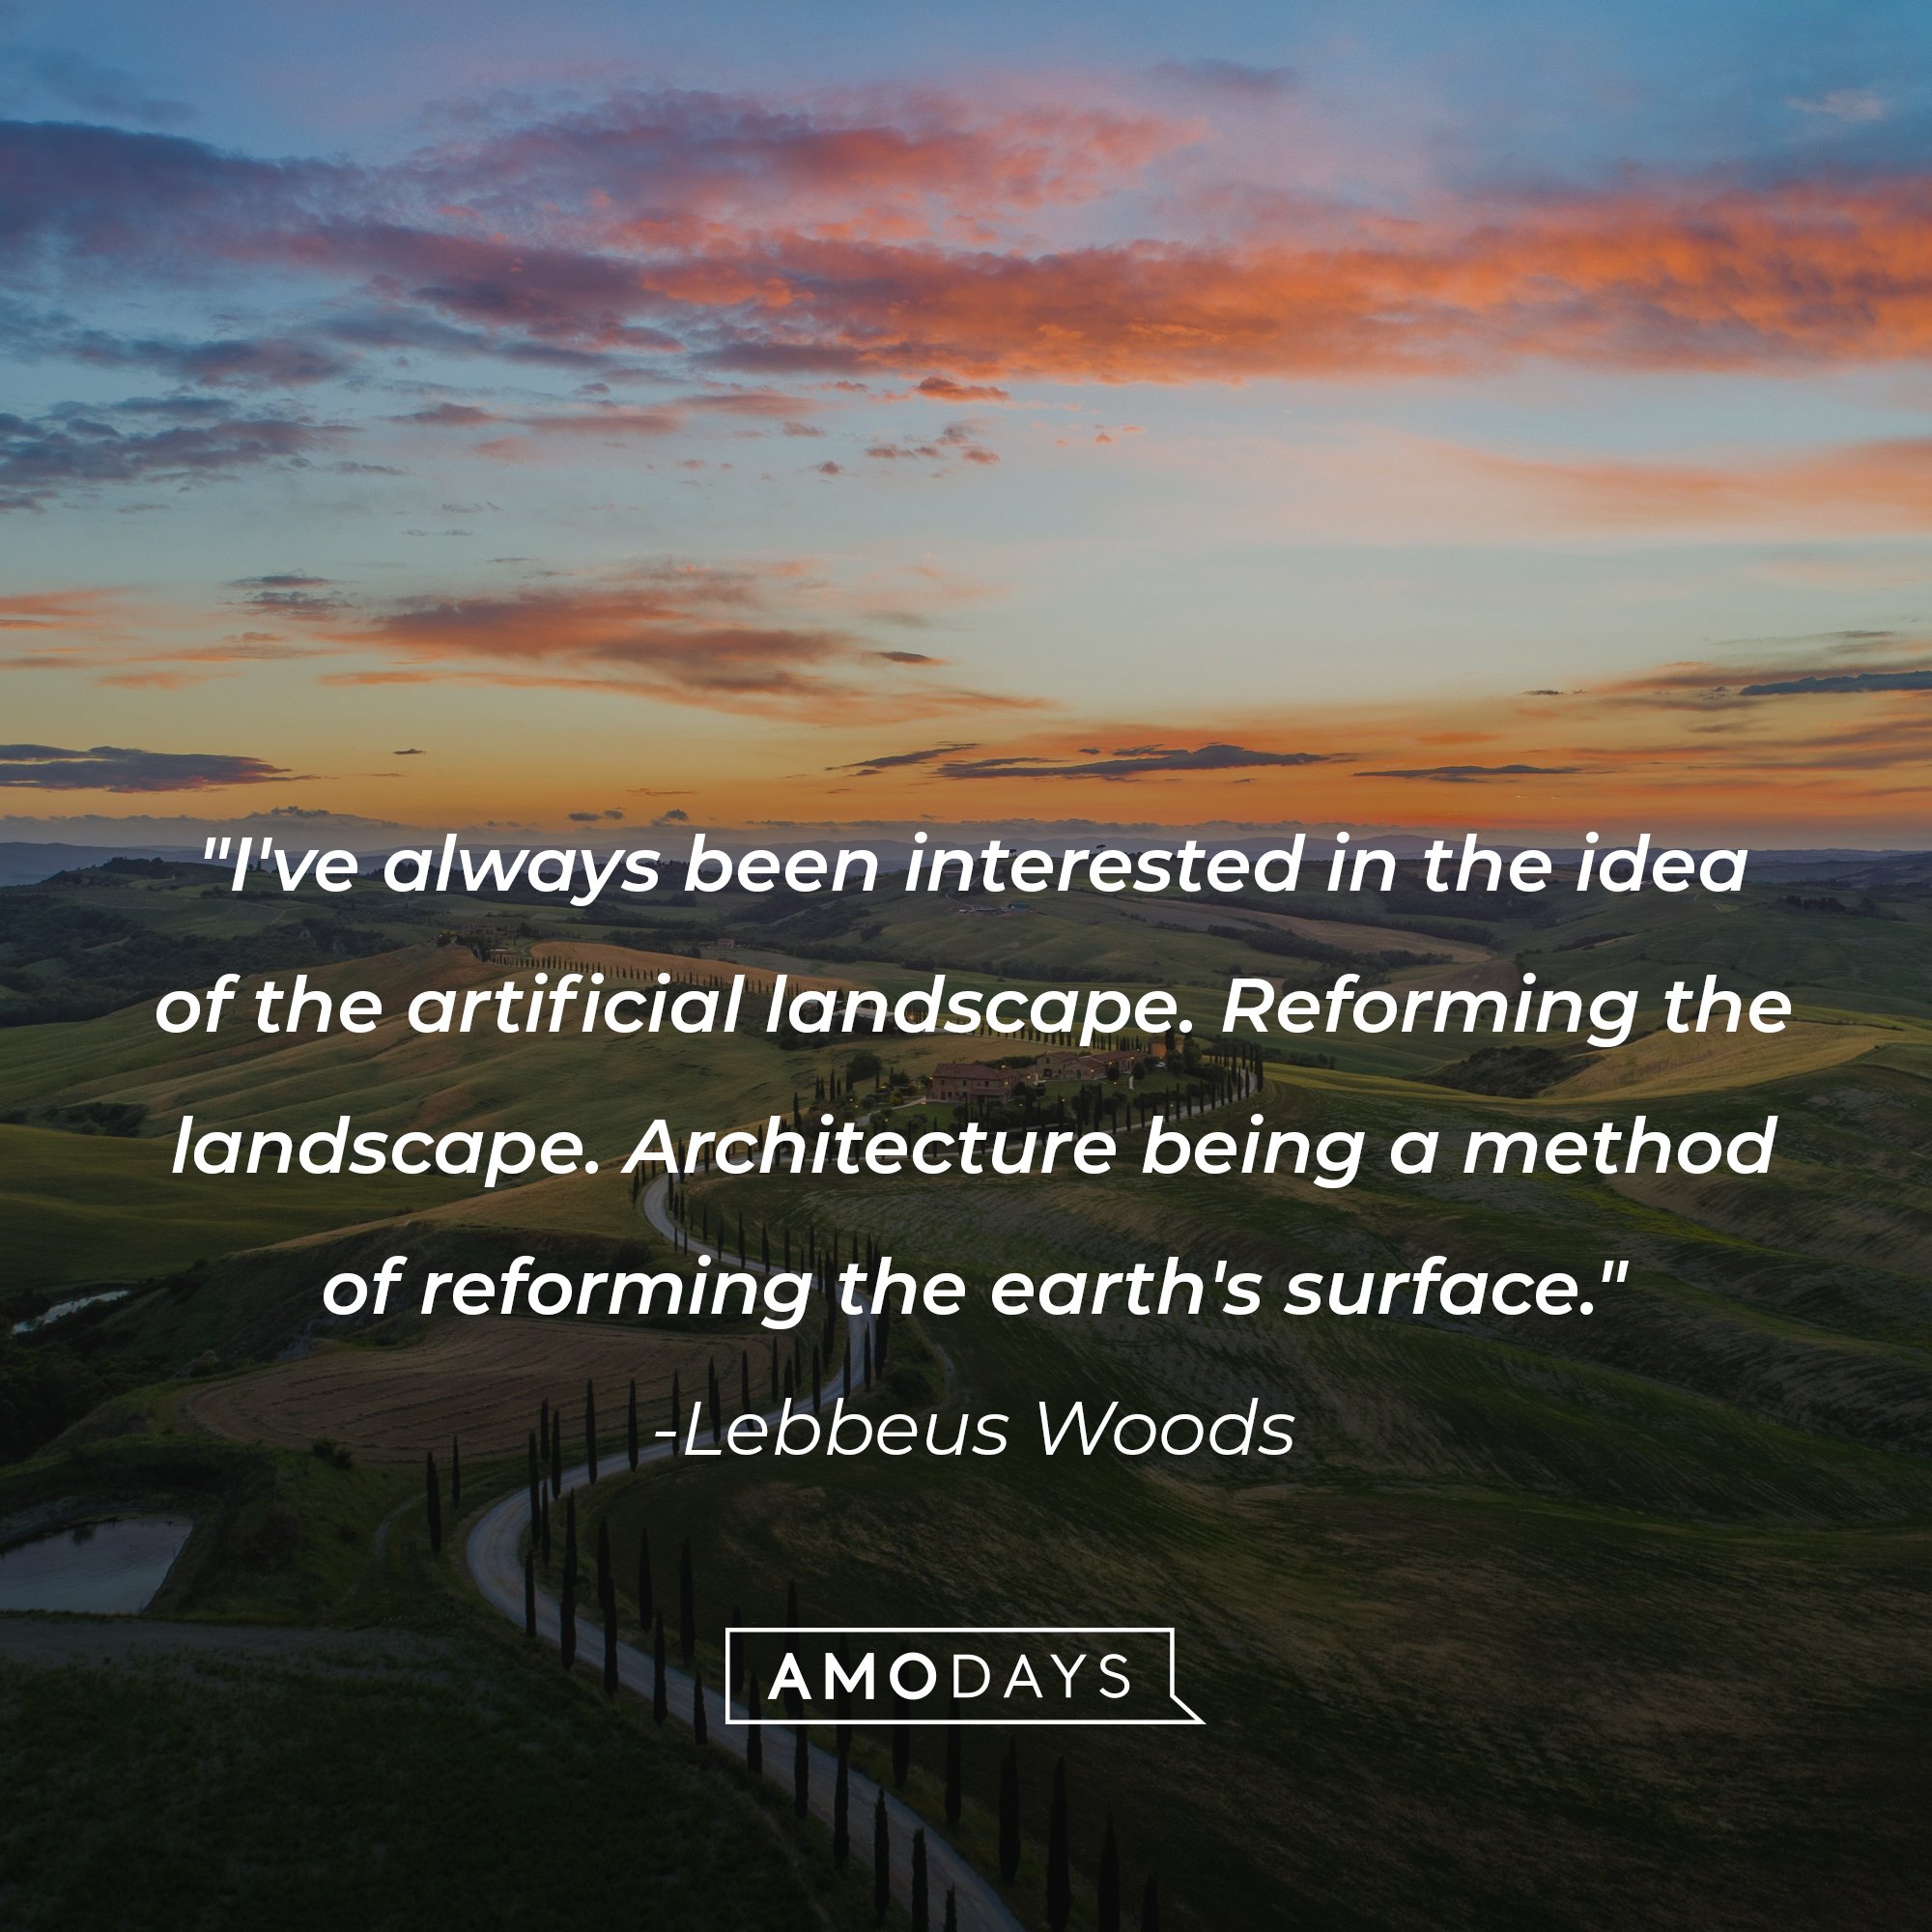 Lebbeus Woods' quote: "I've always been interested in the idea of the artificial landscape. Reforming the landscape. Architecture being a method of reforming the earth's surface." | Image: AmoDays